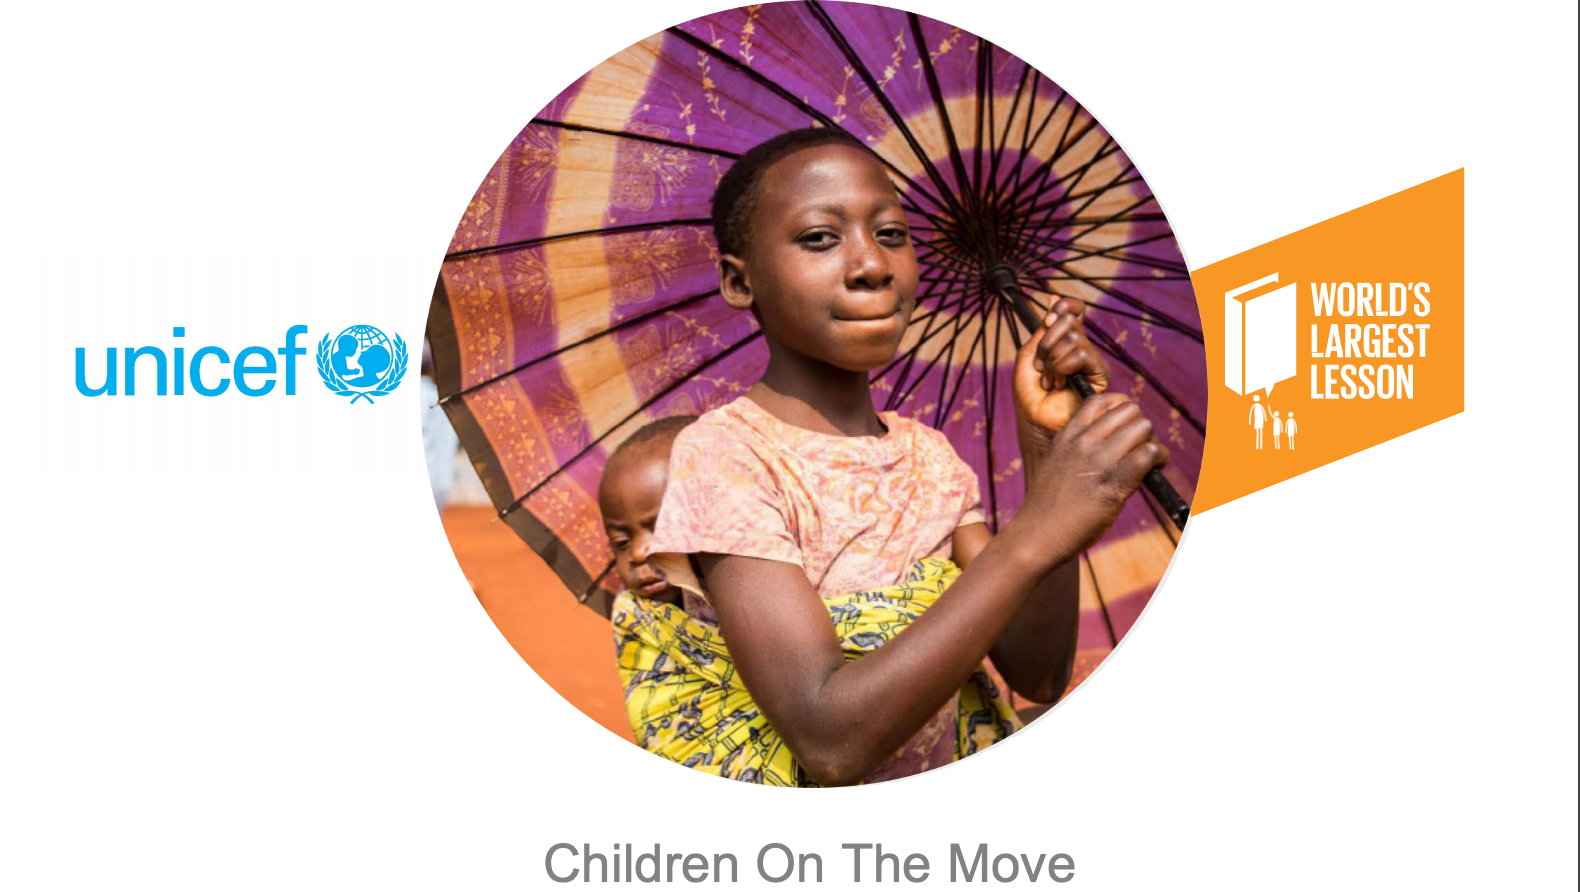 UNICEFF- children on the move PDF graphic with a round photo of young girl in Africa wearing a pink shirt, holding a decorative, purple, cloth umbrella